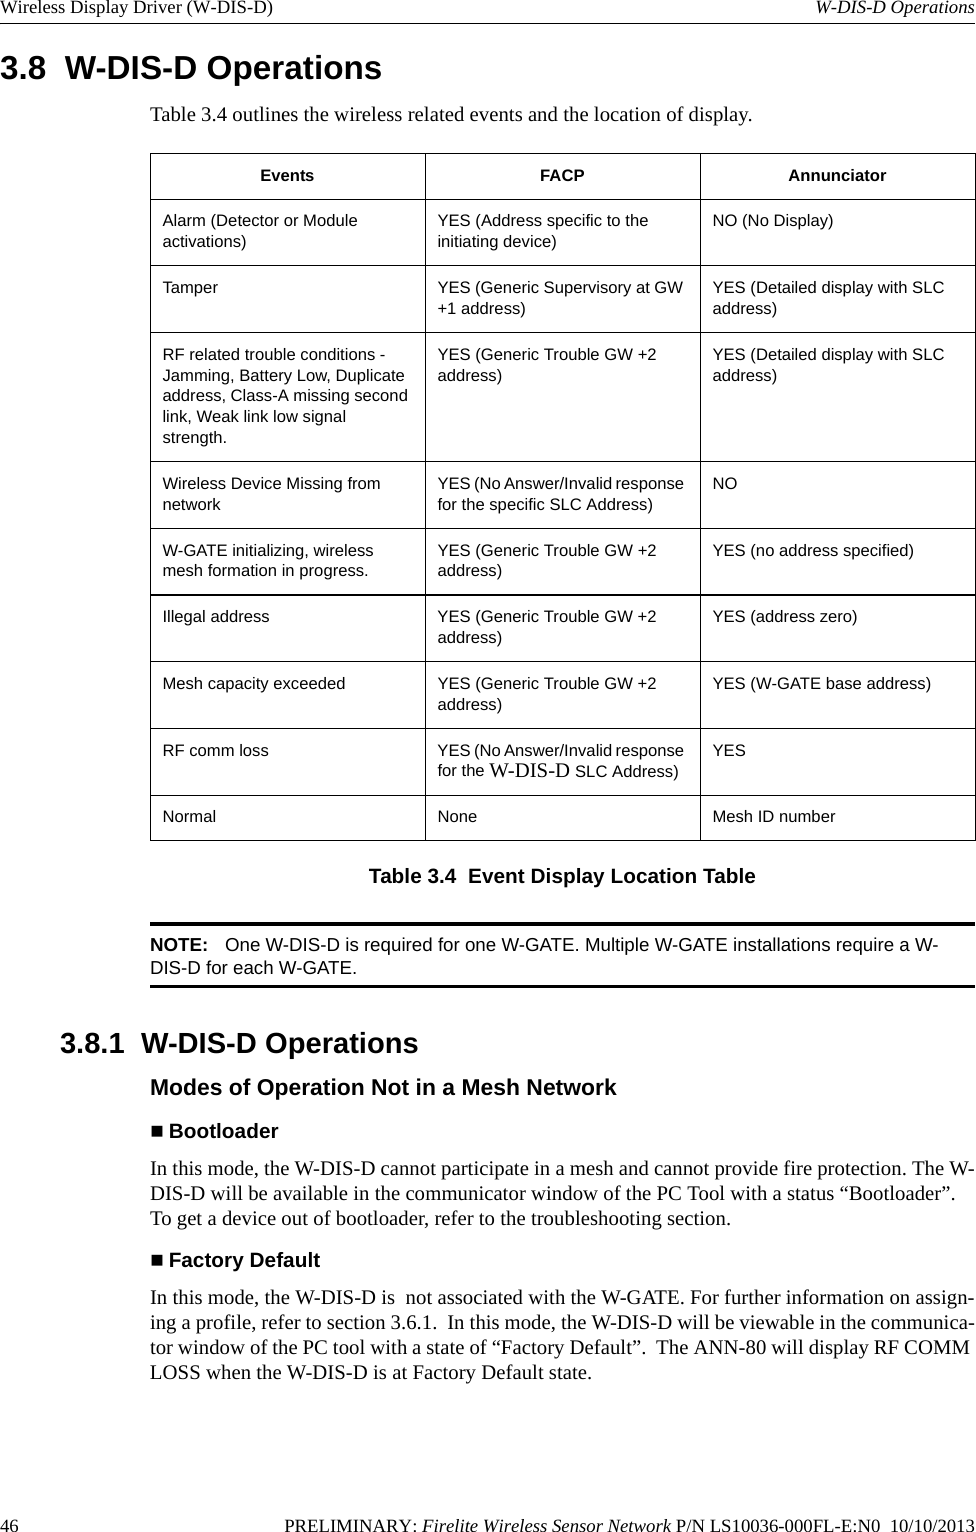 46 PRELIMINARY: Firelite Wireless Sensor Network P/N LS10036-000FL-E:N0  10/10/2013Wireless Display Driver (W-DIS-D) W-DIS-D Operations3.8  W-DIS-D OperationsTable 3.4 outlines the wireless related events and the location of display.Table 3.4  Event Display Location TableNOTE: One W-DIS-D is required for one W-GATE. Multiple W-GATE installations require a W-DIS-D for each W-GATE.3.8.1  W-DIS-D OperationsModes of Operation Not in a Mesh NetworkBootloaderIn this mode, the W-DIS-D cannot participate in a mesh and cannot provide fire protection. The W-DIS-D will be available in the communicator window of the PC Tool with a status “Bootloader”.  To get a device out of bootloader, refer to the troubleshooting section.Factory DefaultIn this mode, the W-DIS-D is  not associated with the W-GATE. For further information on assign-ing a profile, refer to section 3.6.1.  In this mode, the W-DIS-D will be viewable in the communica-tor window of the PC tool with a state of “Factory Default”.  The ANN-80 will display RF COMM LOSS when the W-DIS-D is at Factory Default state. Events FACP AnnunciatorAlarm (Detector or Module activations)YES (Address specific to the initiating device)NO (No Display)Tamper YES (Generic Supervisory at GW +1 address)YES (Detailed display with SLC address)RF related trouble conditions -  Jamming, Battery Low, Duplicate address, Class-A missing second link, Weak link low signal strength. YES (Generic Trouble GW +2 address)YES (Detailed display with SLC address)Wireless Device Missing from networkYES (No Answer/Invalid response for the specific SLC Address)NOW-GATE initializing, wireless mesh formation in progress. YES (Generic Trouble GW +2 address)YES (no address specified)Illegal address YES (Generic Trouble GW +2 address)YES (address zero)Mesh capacity exceeded YES (Generic Trouble GW +2 address)YES (W-GATE base address)RF comm loss YES (No Answer/Invalid response for the W-DIS-D SLC Address)YESNormal None  Mesh ID number